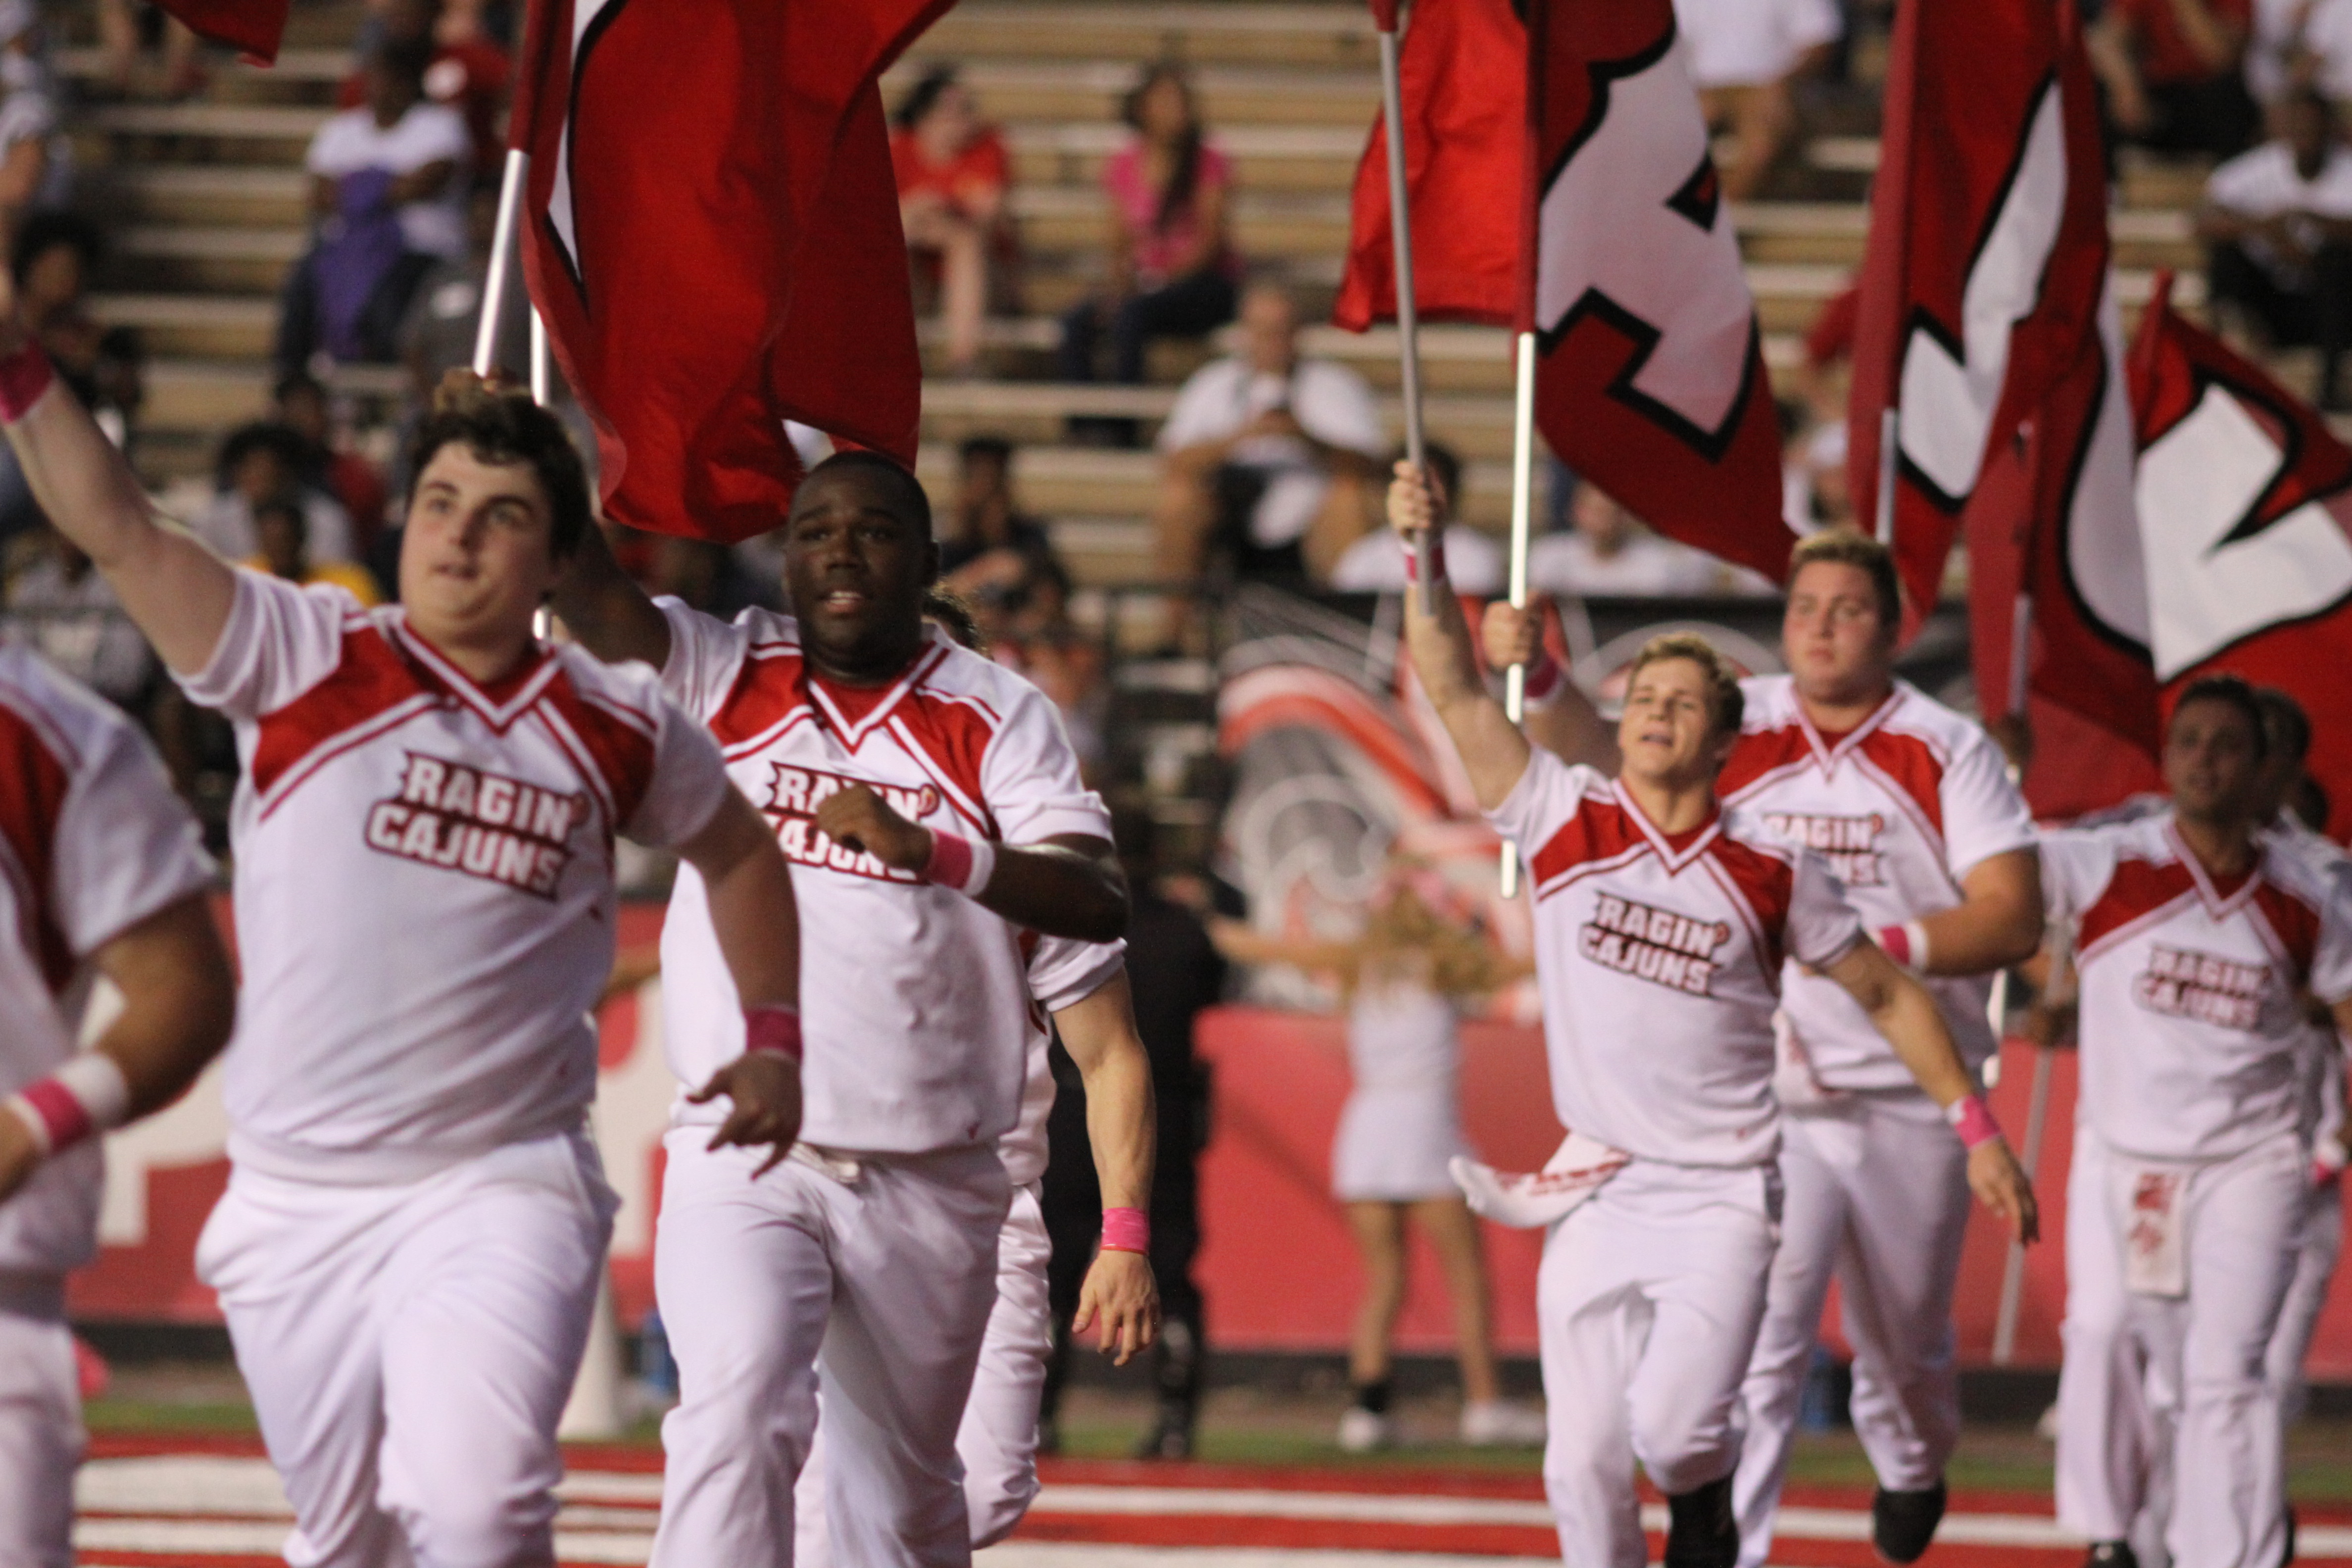 RAGIN’ CAJUNS FOOTBALL GAME SEVEN PREVIEW: at Arkansas State